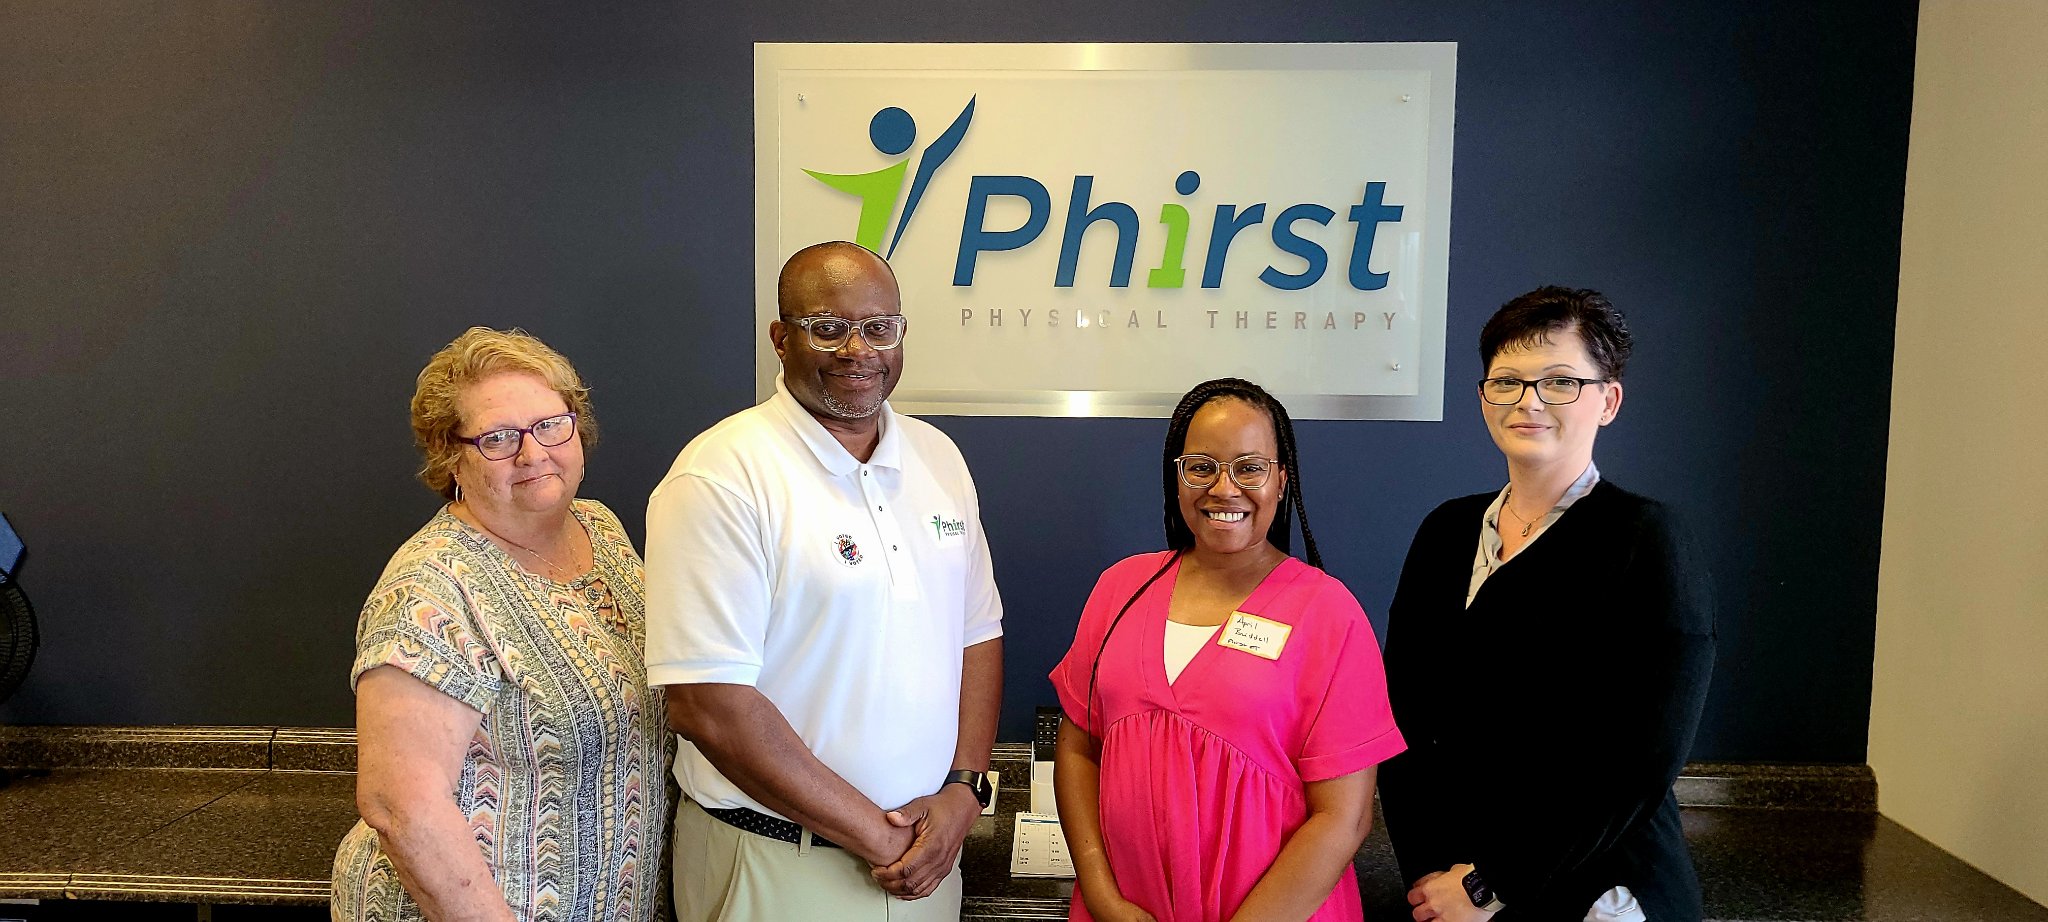 Phirst Physical Therapy Staff from left to right- Pat Foskey, Dr. Derrick Briddell, April Briddell, Ashlee Dickerson